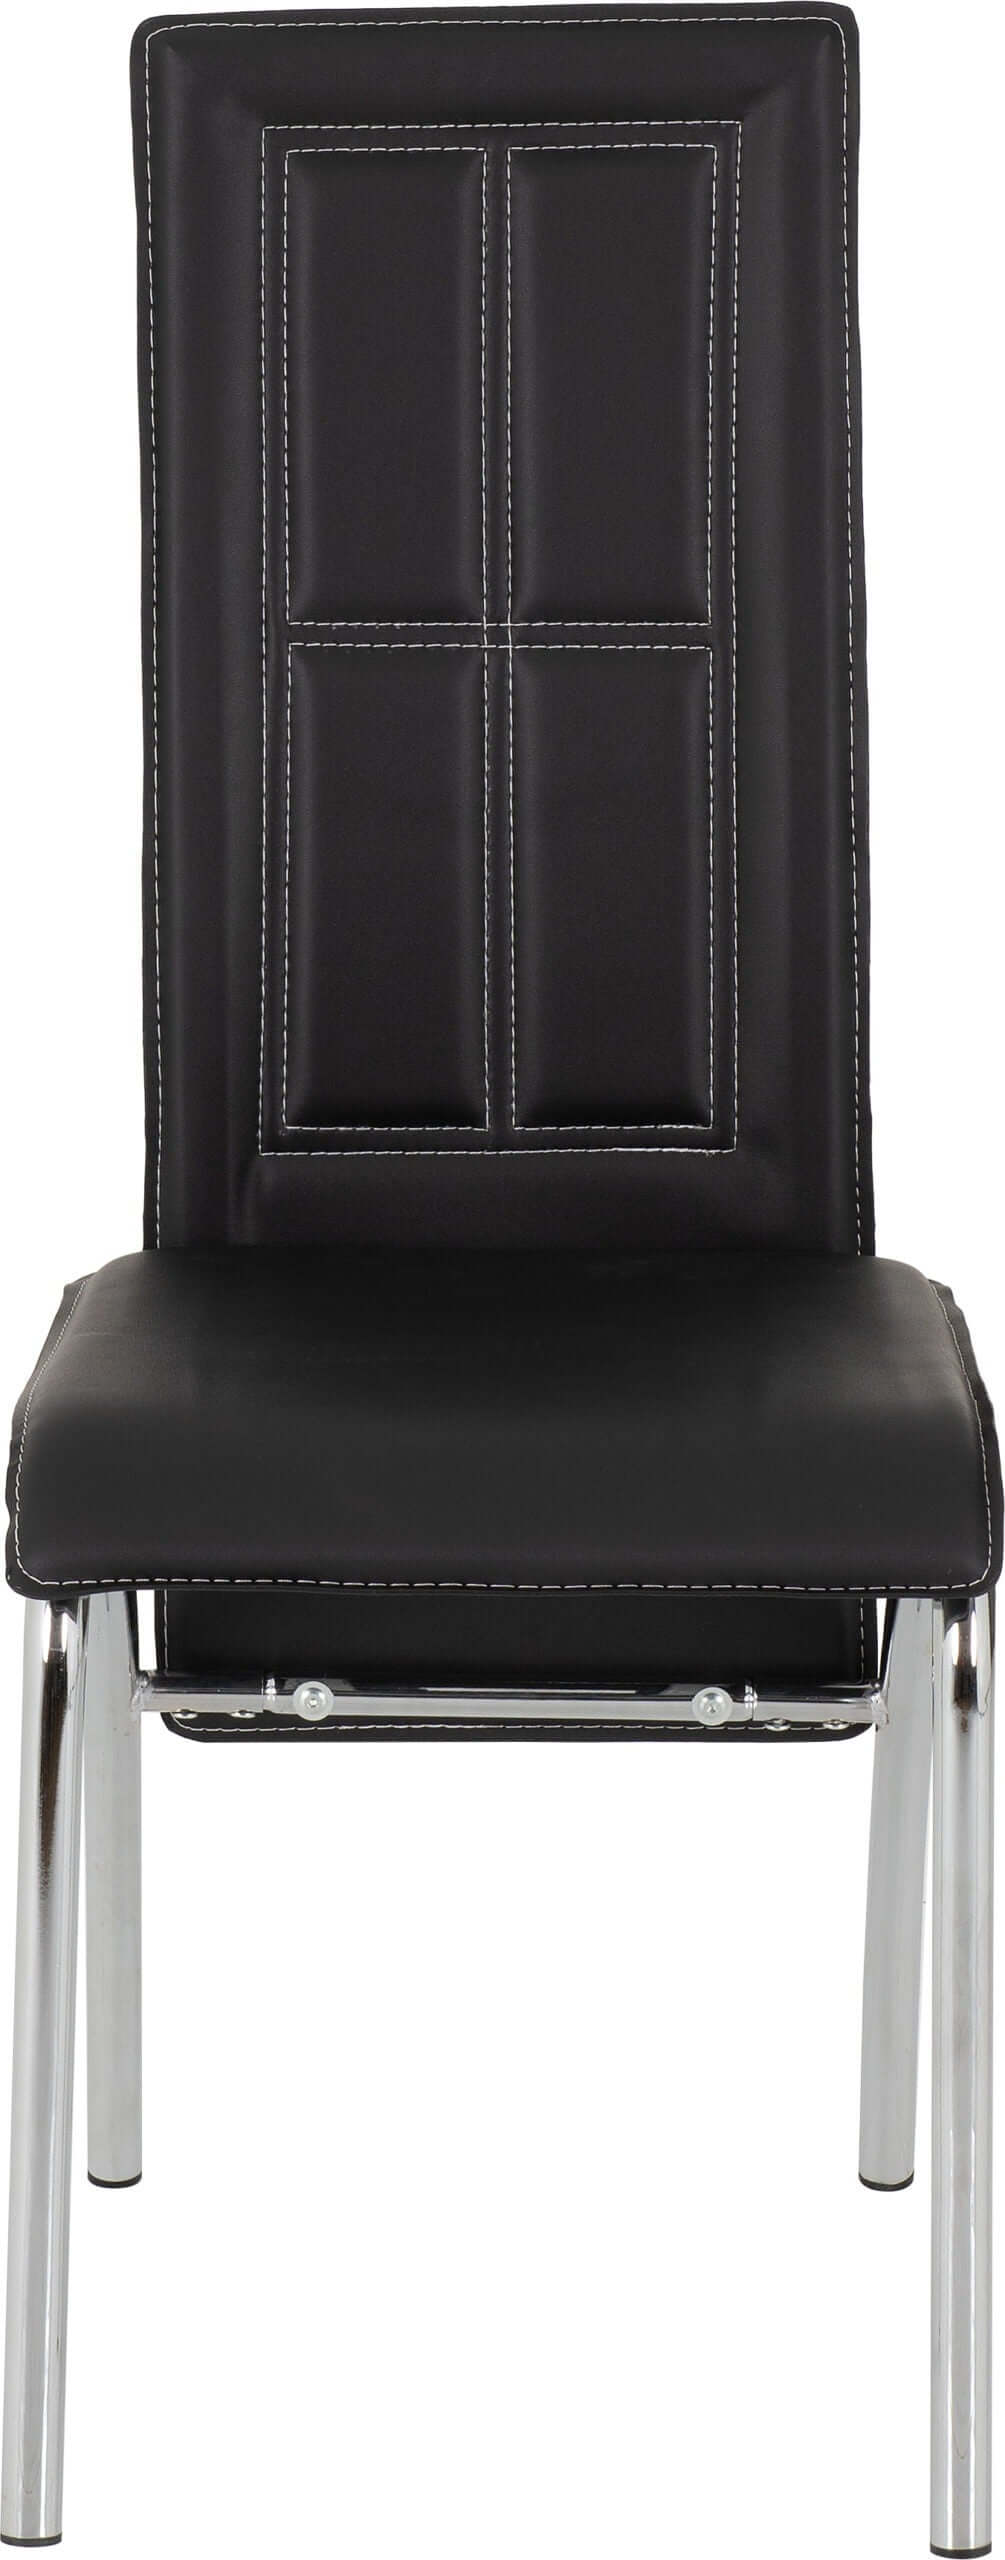 A3 Dining Chair - Black Faux Leather/Chrome